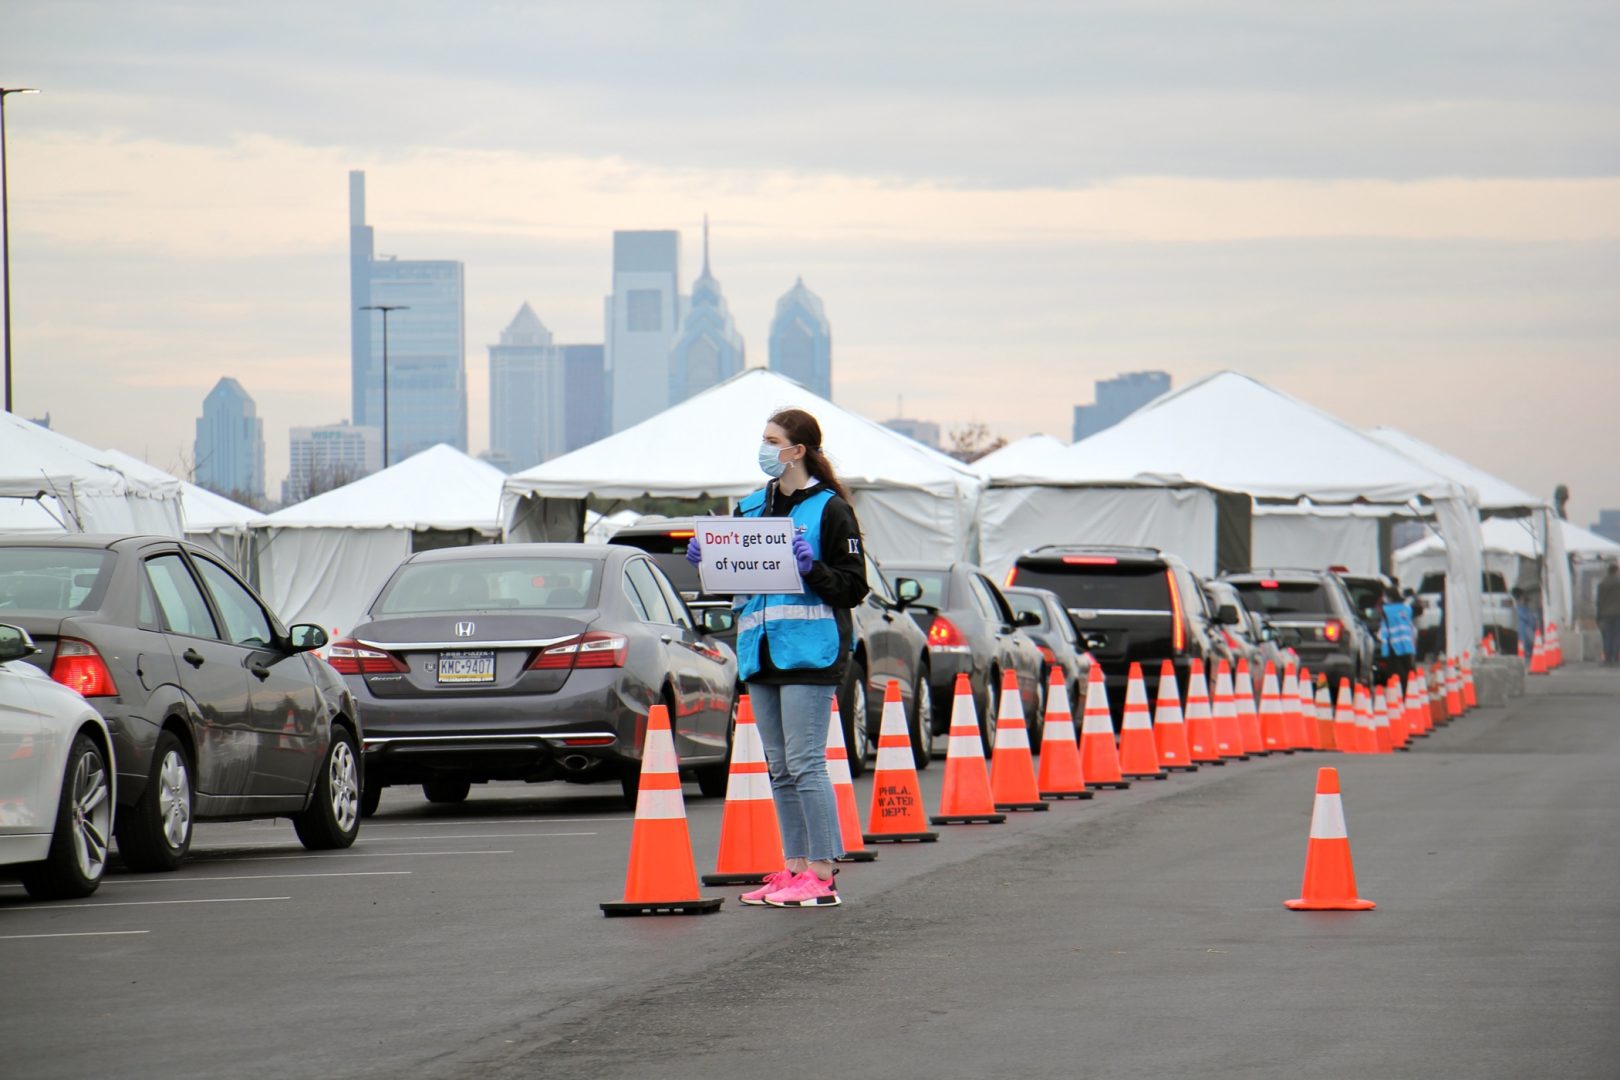 Cars line up at a drive through coronavirus test station in the parking lot at Citizens Bank Park.